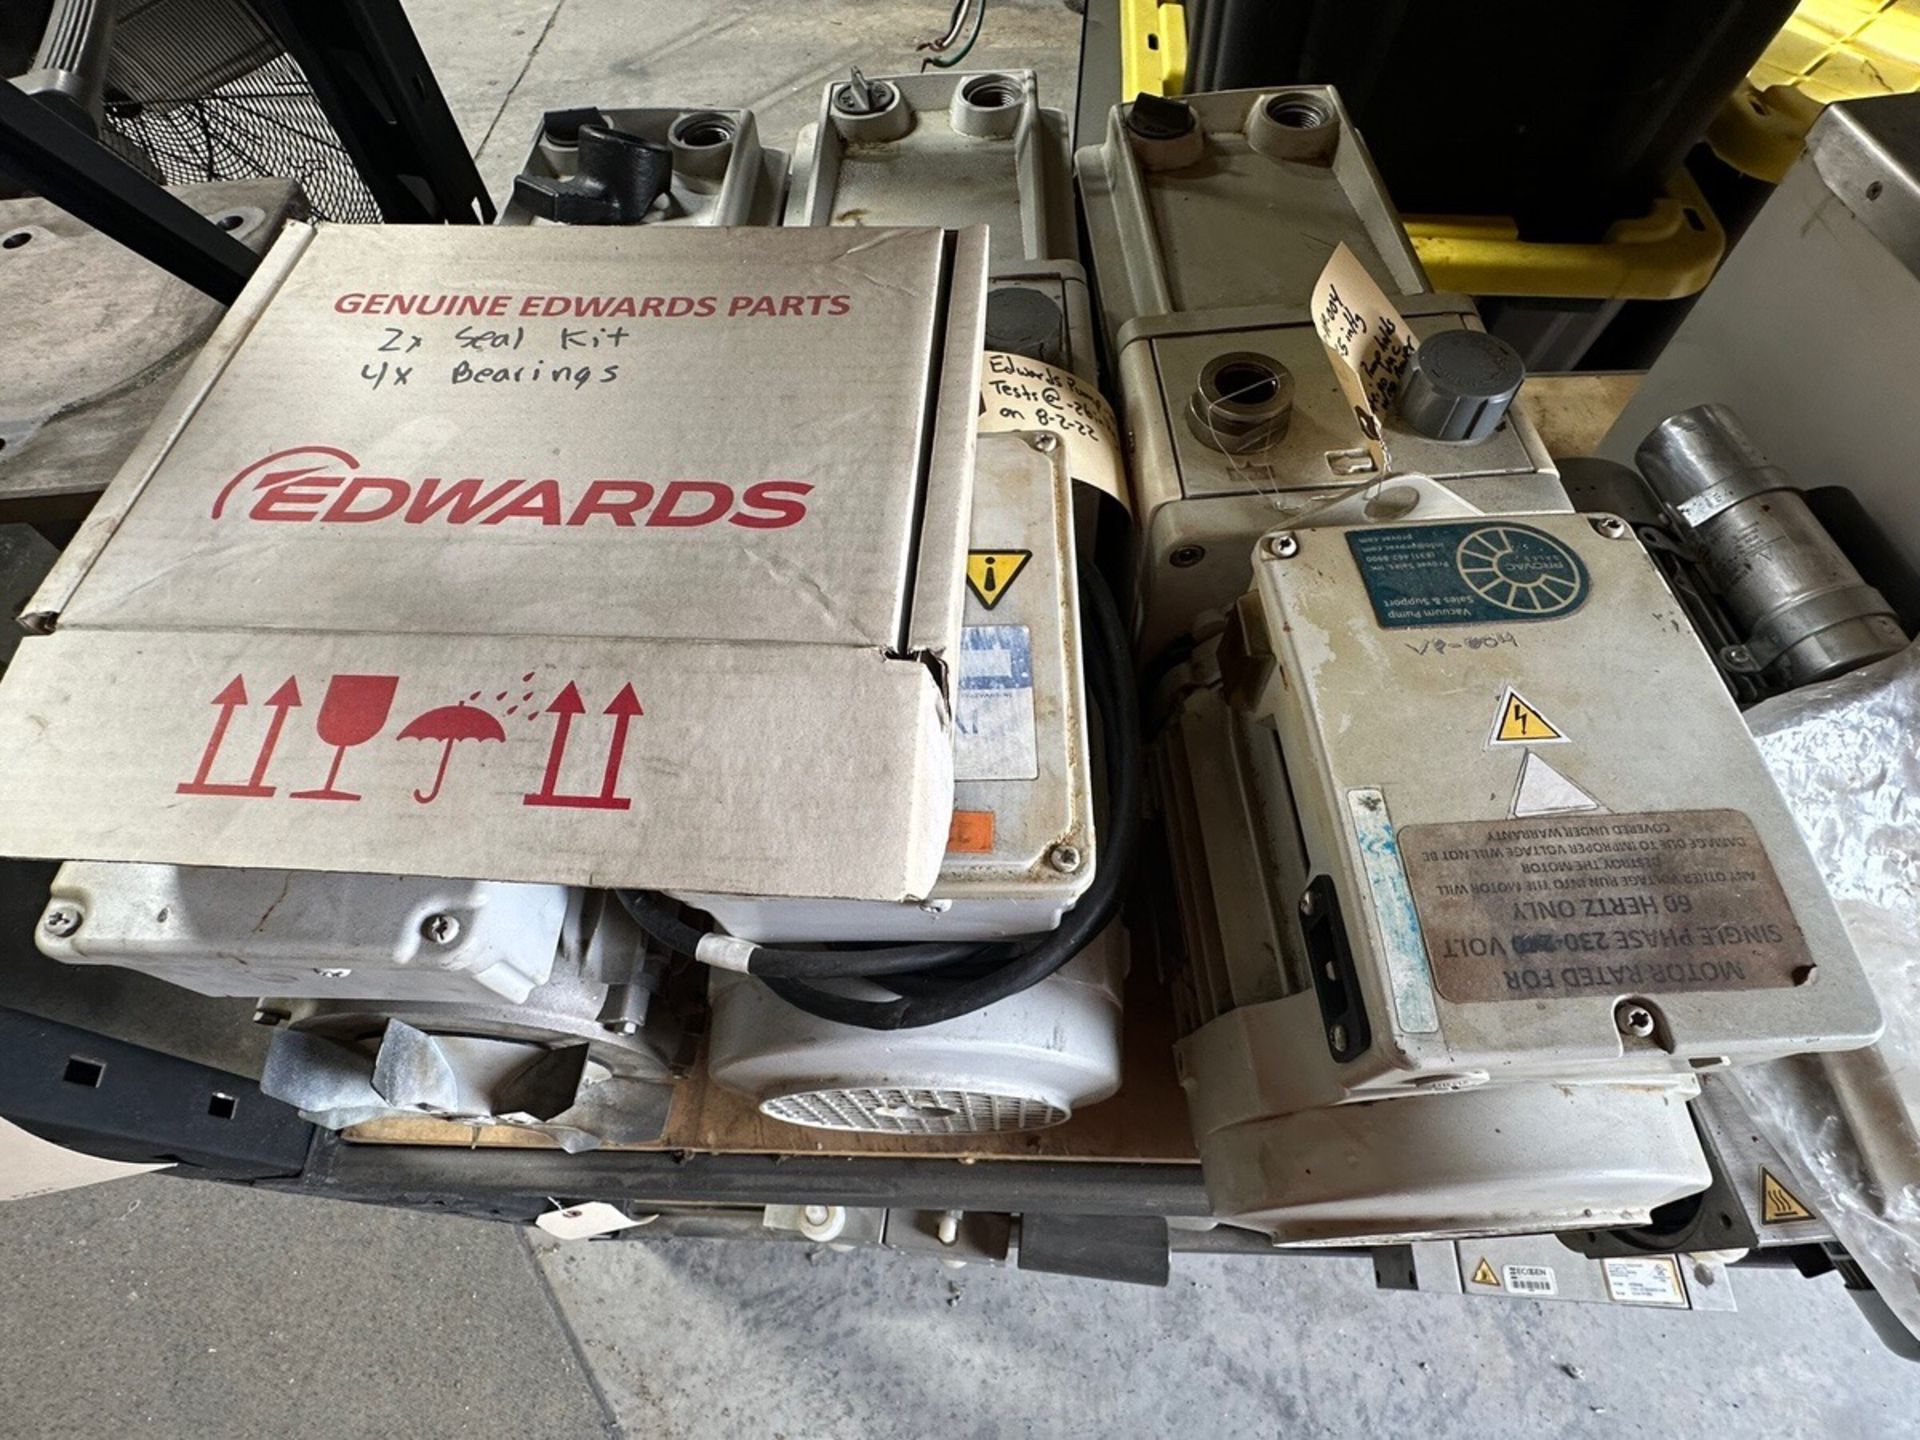 Single Shelf Contents, Excludes Edwards Vacuum Pumps | Rig Fee $125 - Image 2 of 5